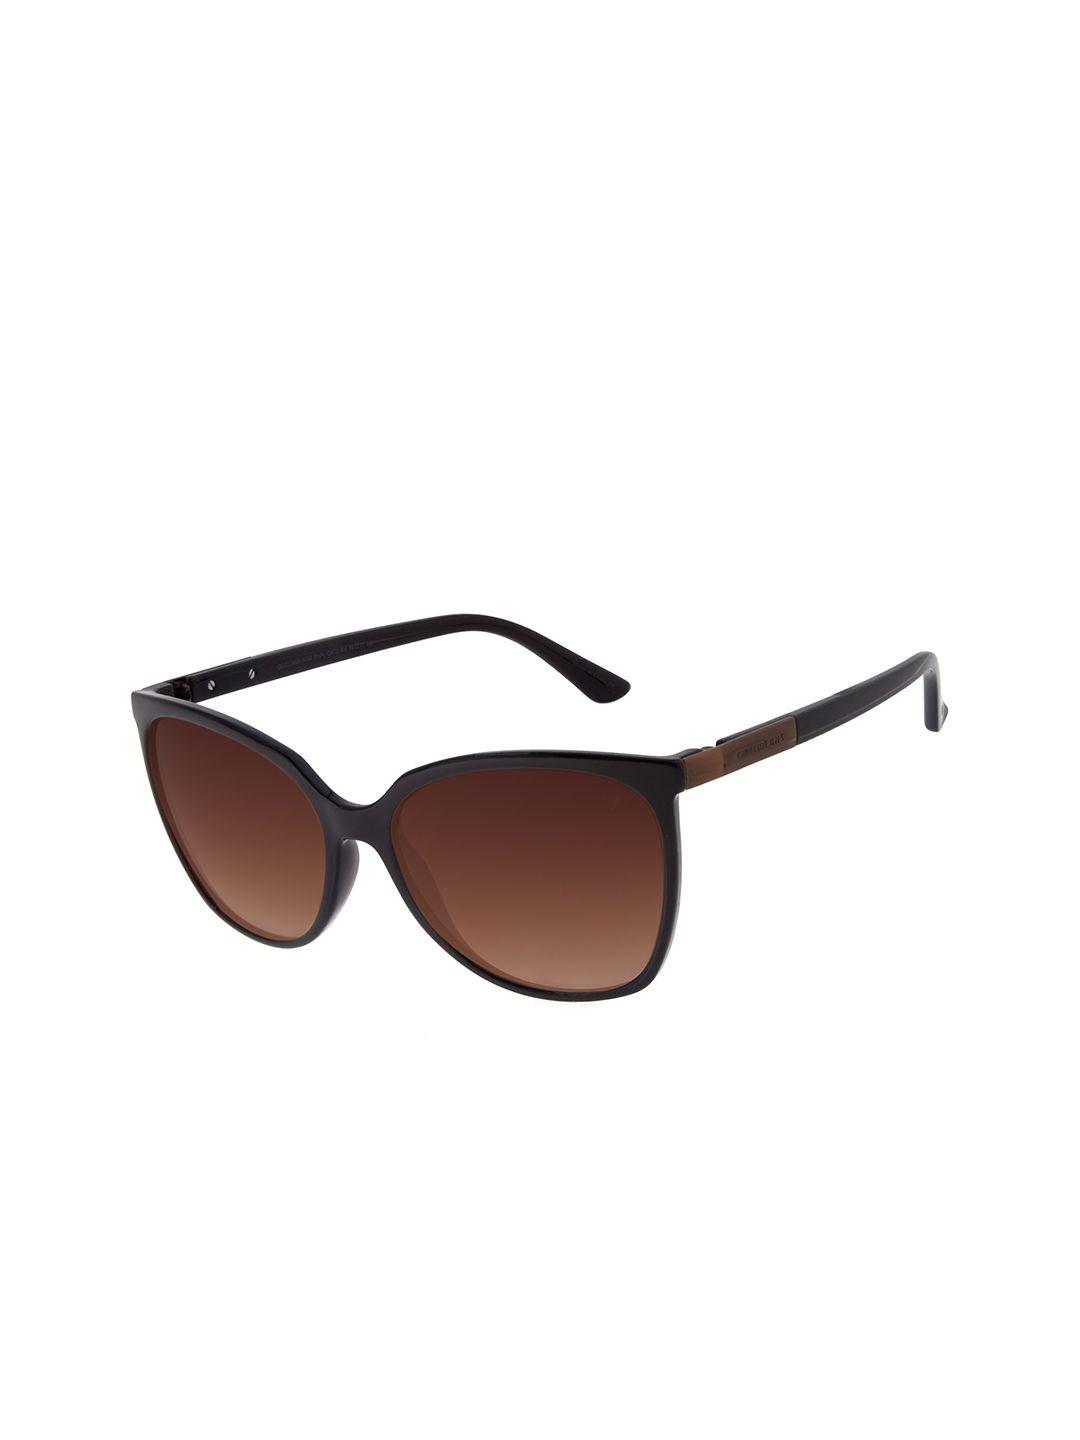 chilli-beans-women-bronze-lens-sunglasses-with-uv-protected-lens-occl34295730